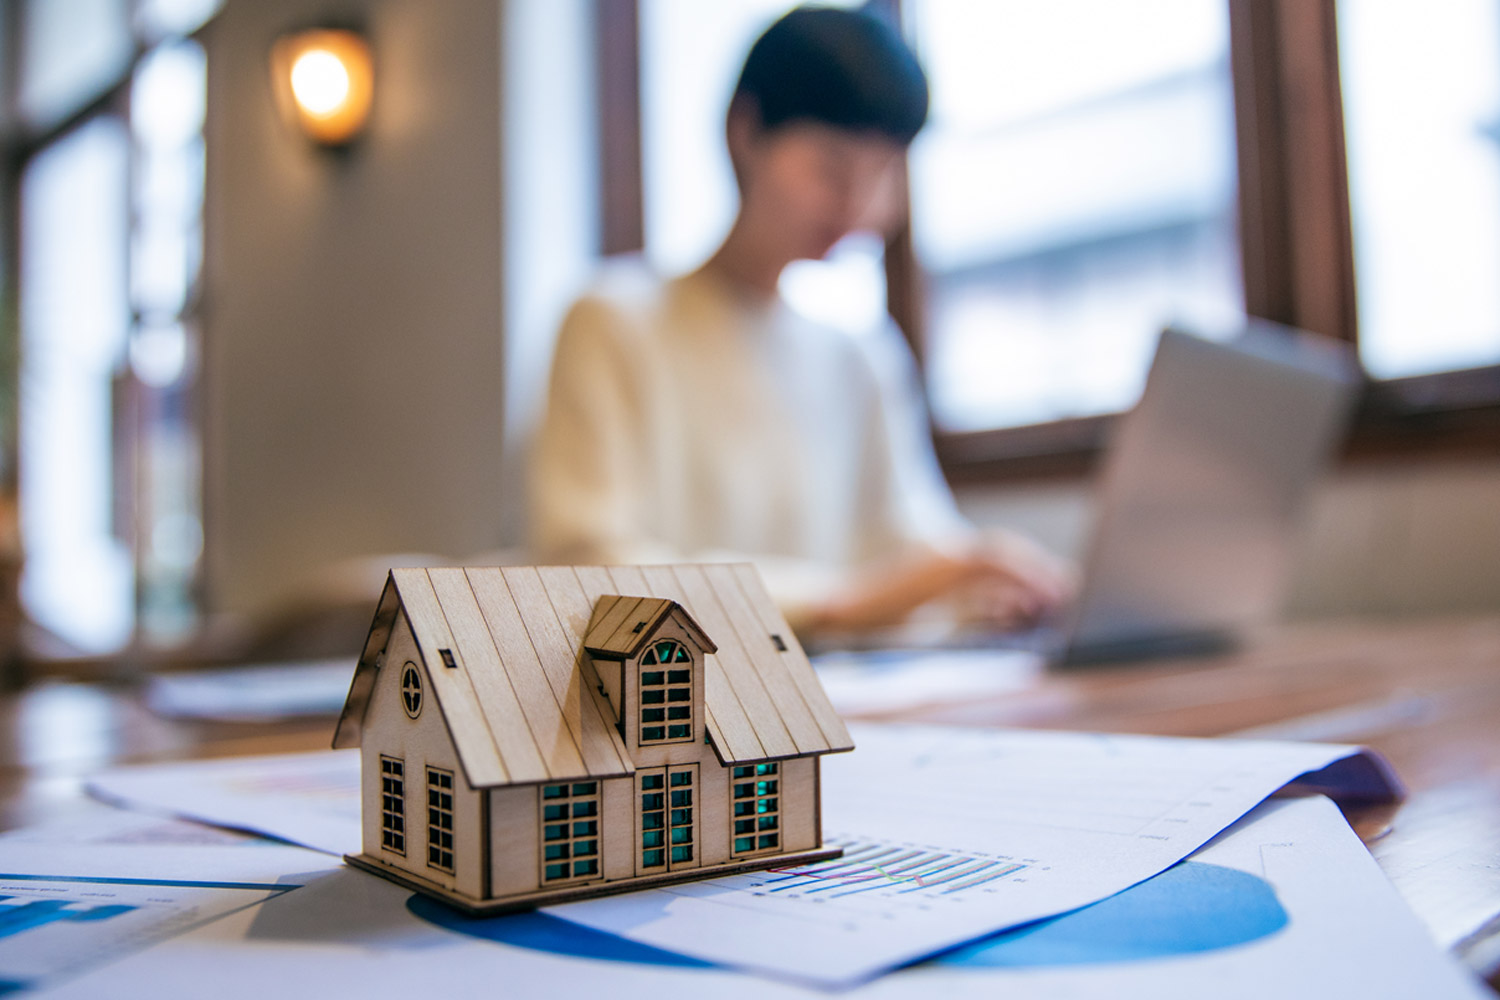 a small model house sits on a table with paper in the foreground while a person works on a laptop out of focus in the background